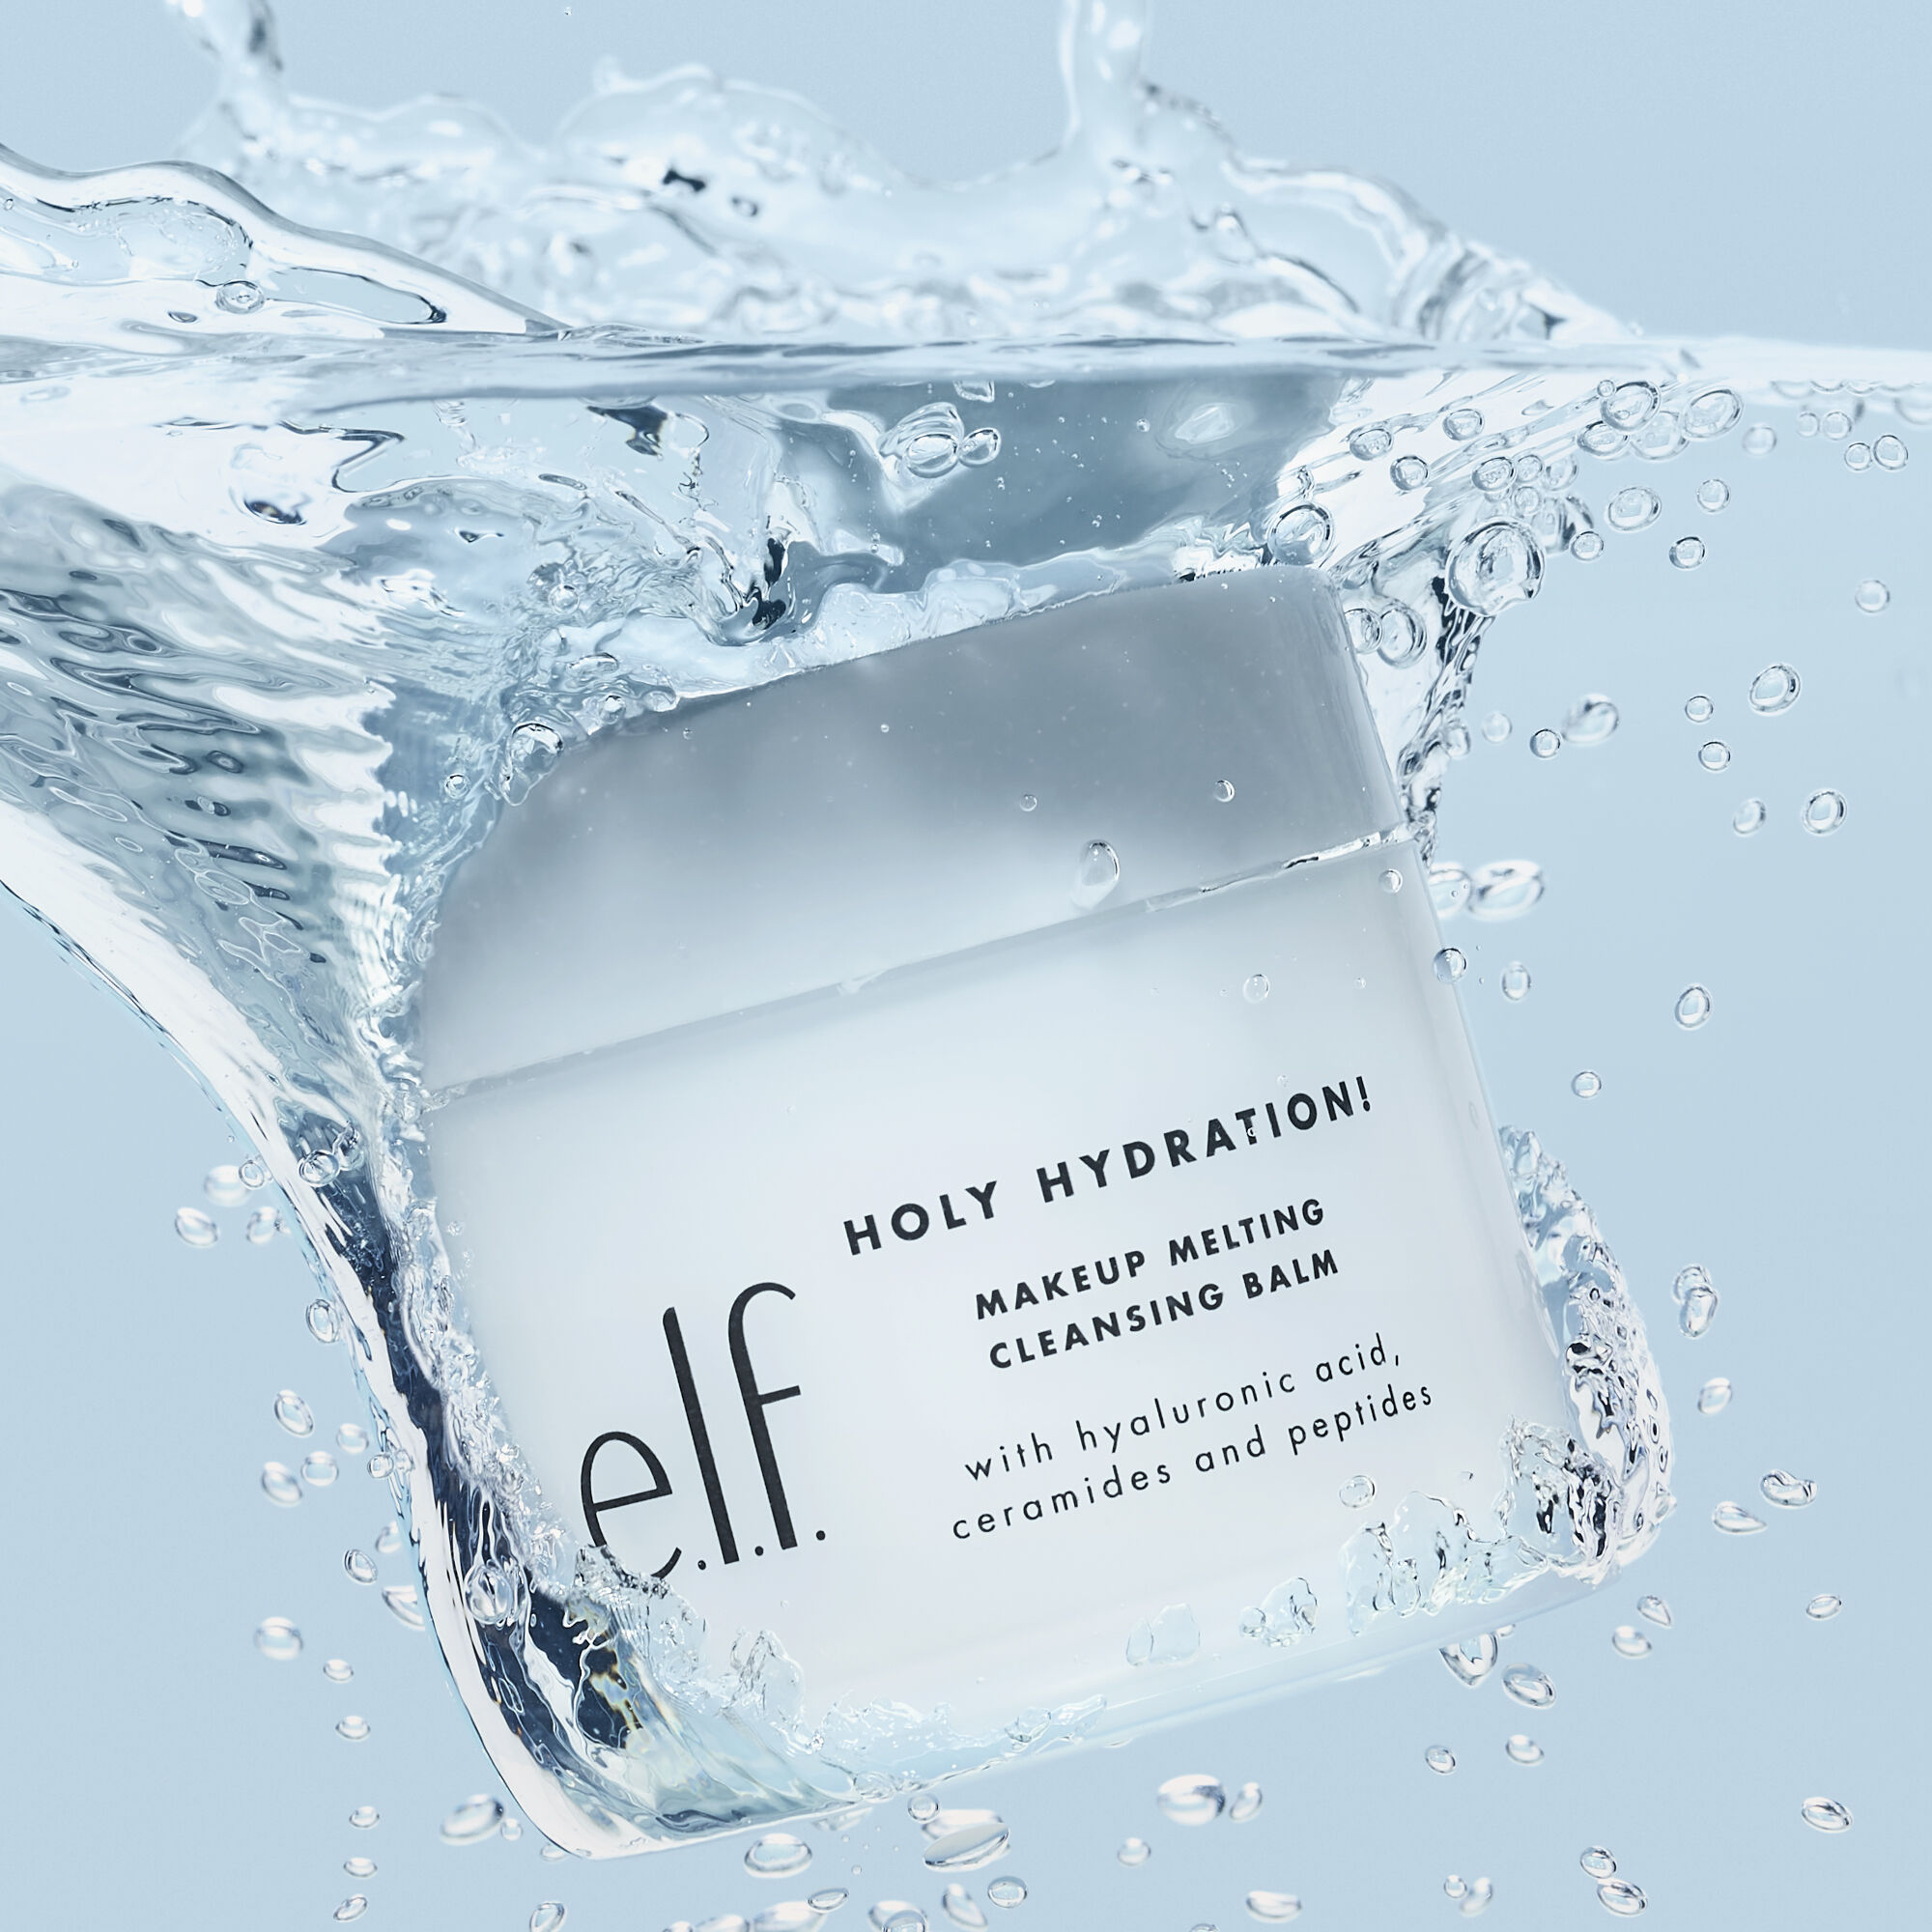 Holy Hydration! Makeup Removing Cleansing Balm | e.l.f. Cosmetics